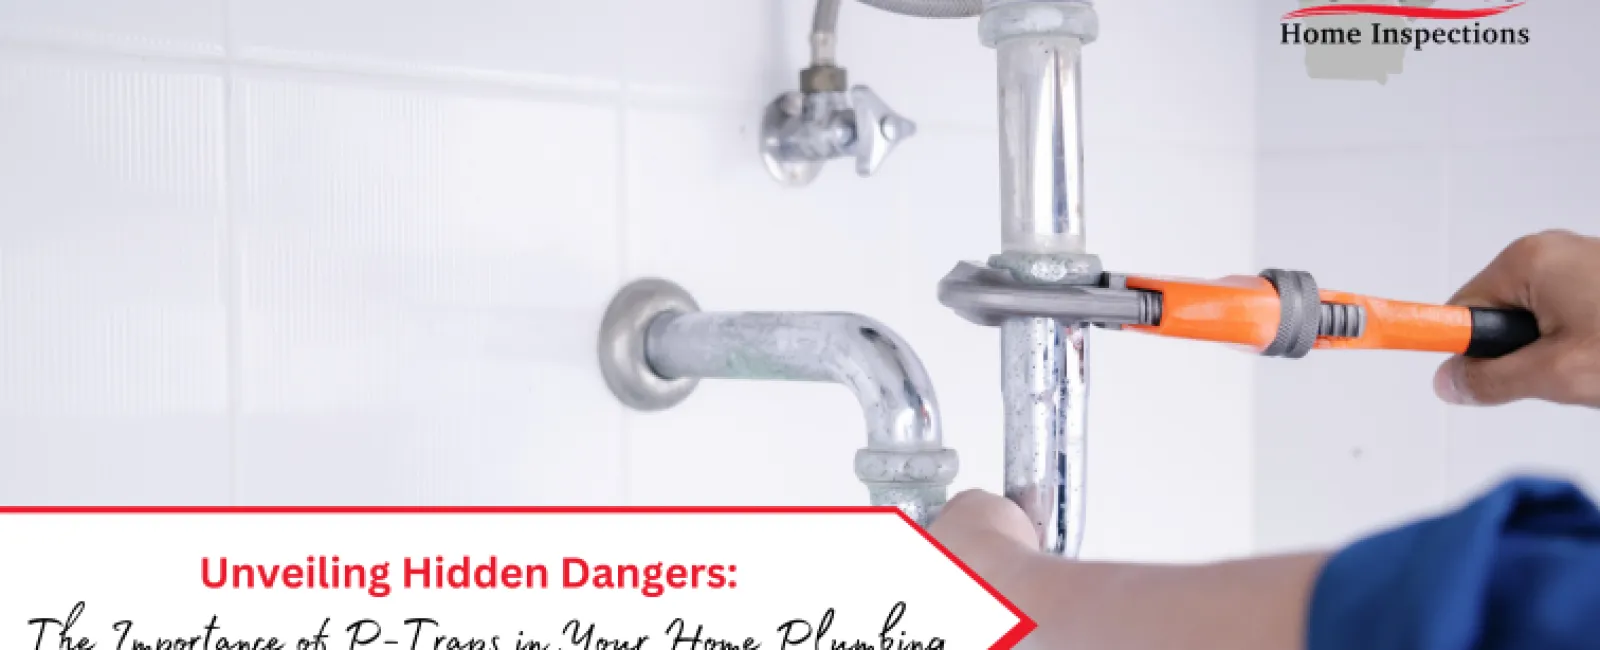 Unveiling Hidden Dangers: The Importance of P-Traps in Your Home Plumbing